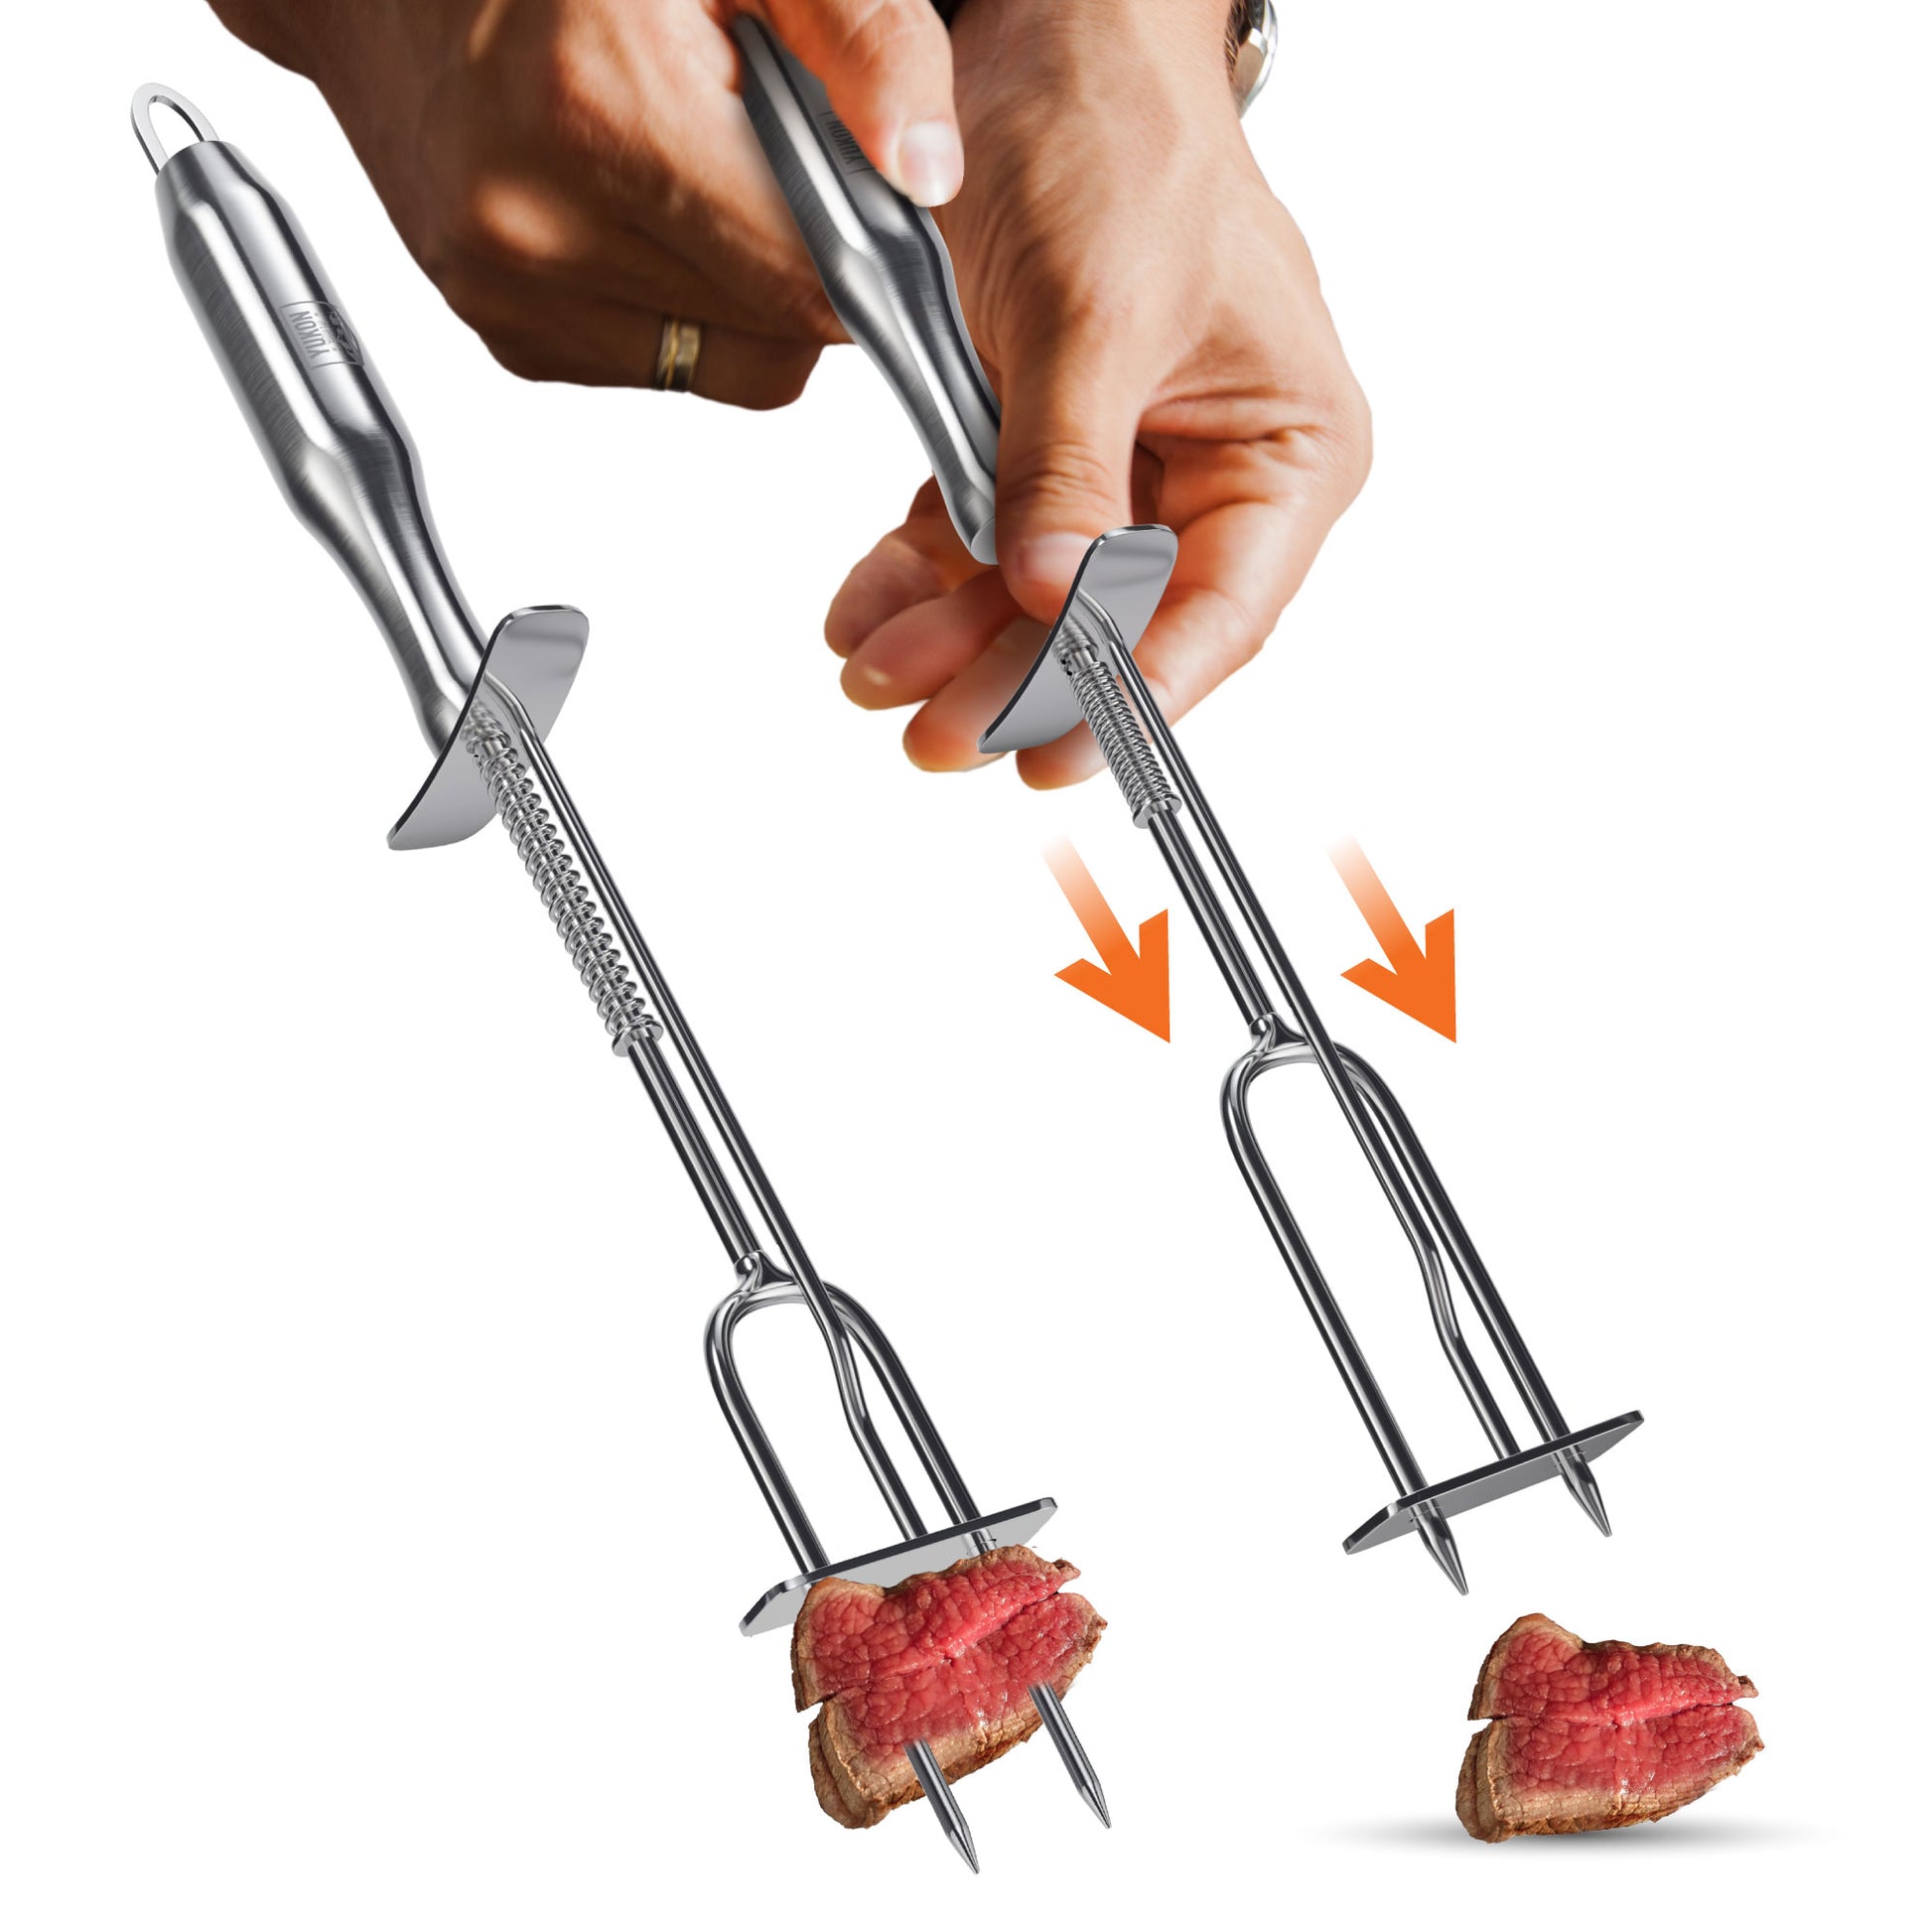 Carving fork with release mechanism holding a piece of medium rare steak.